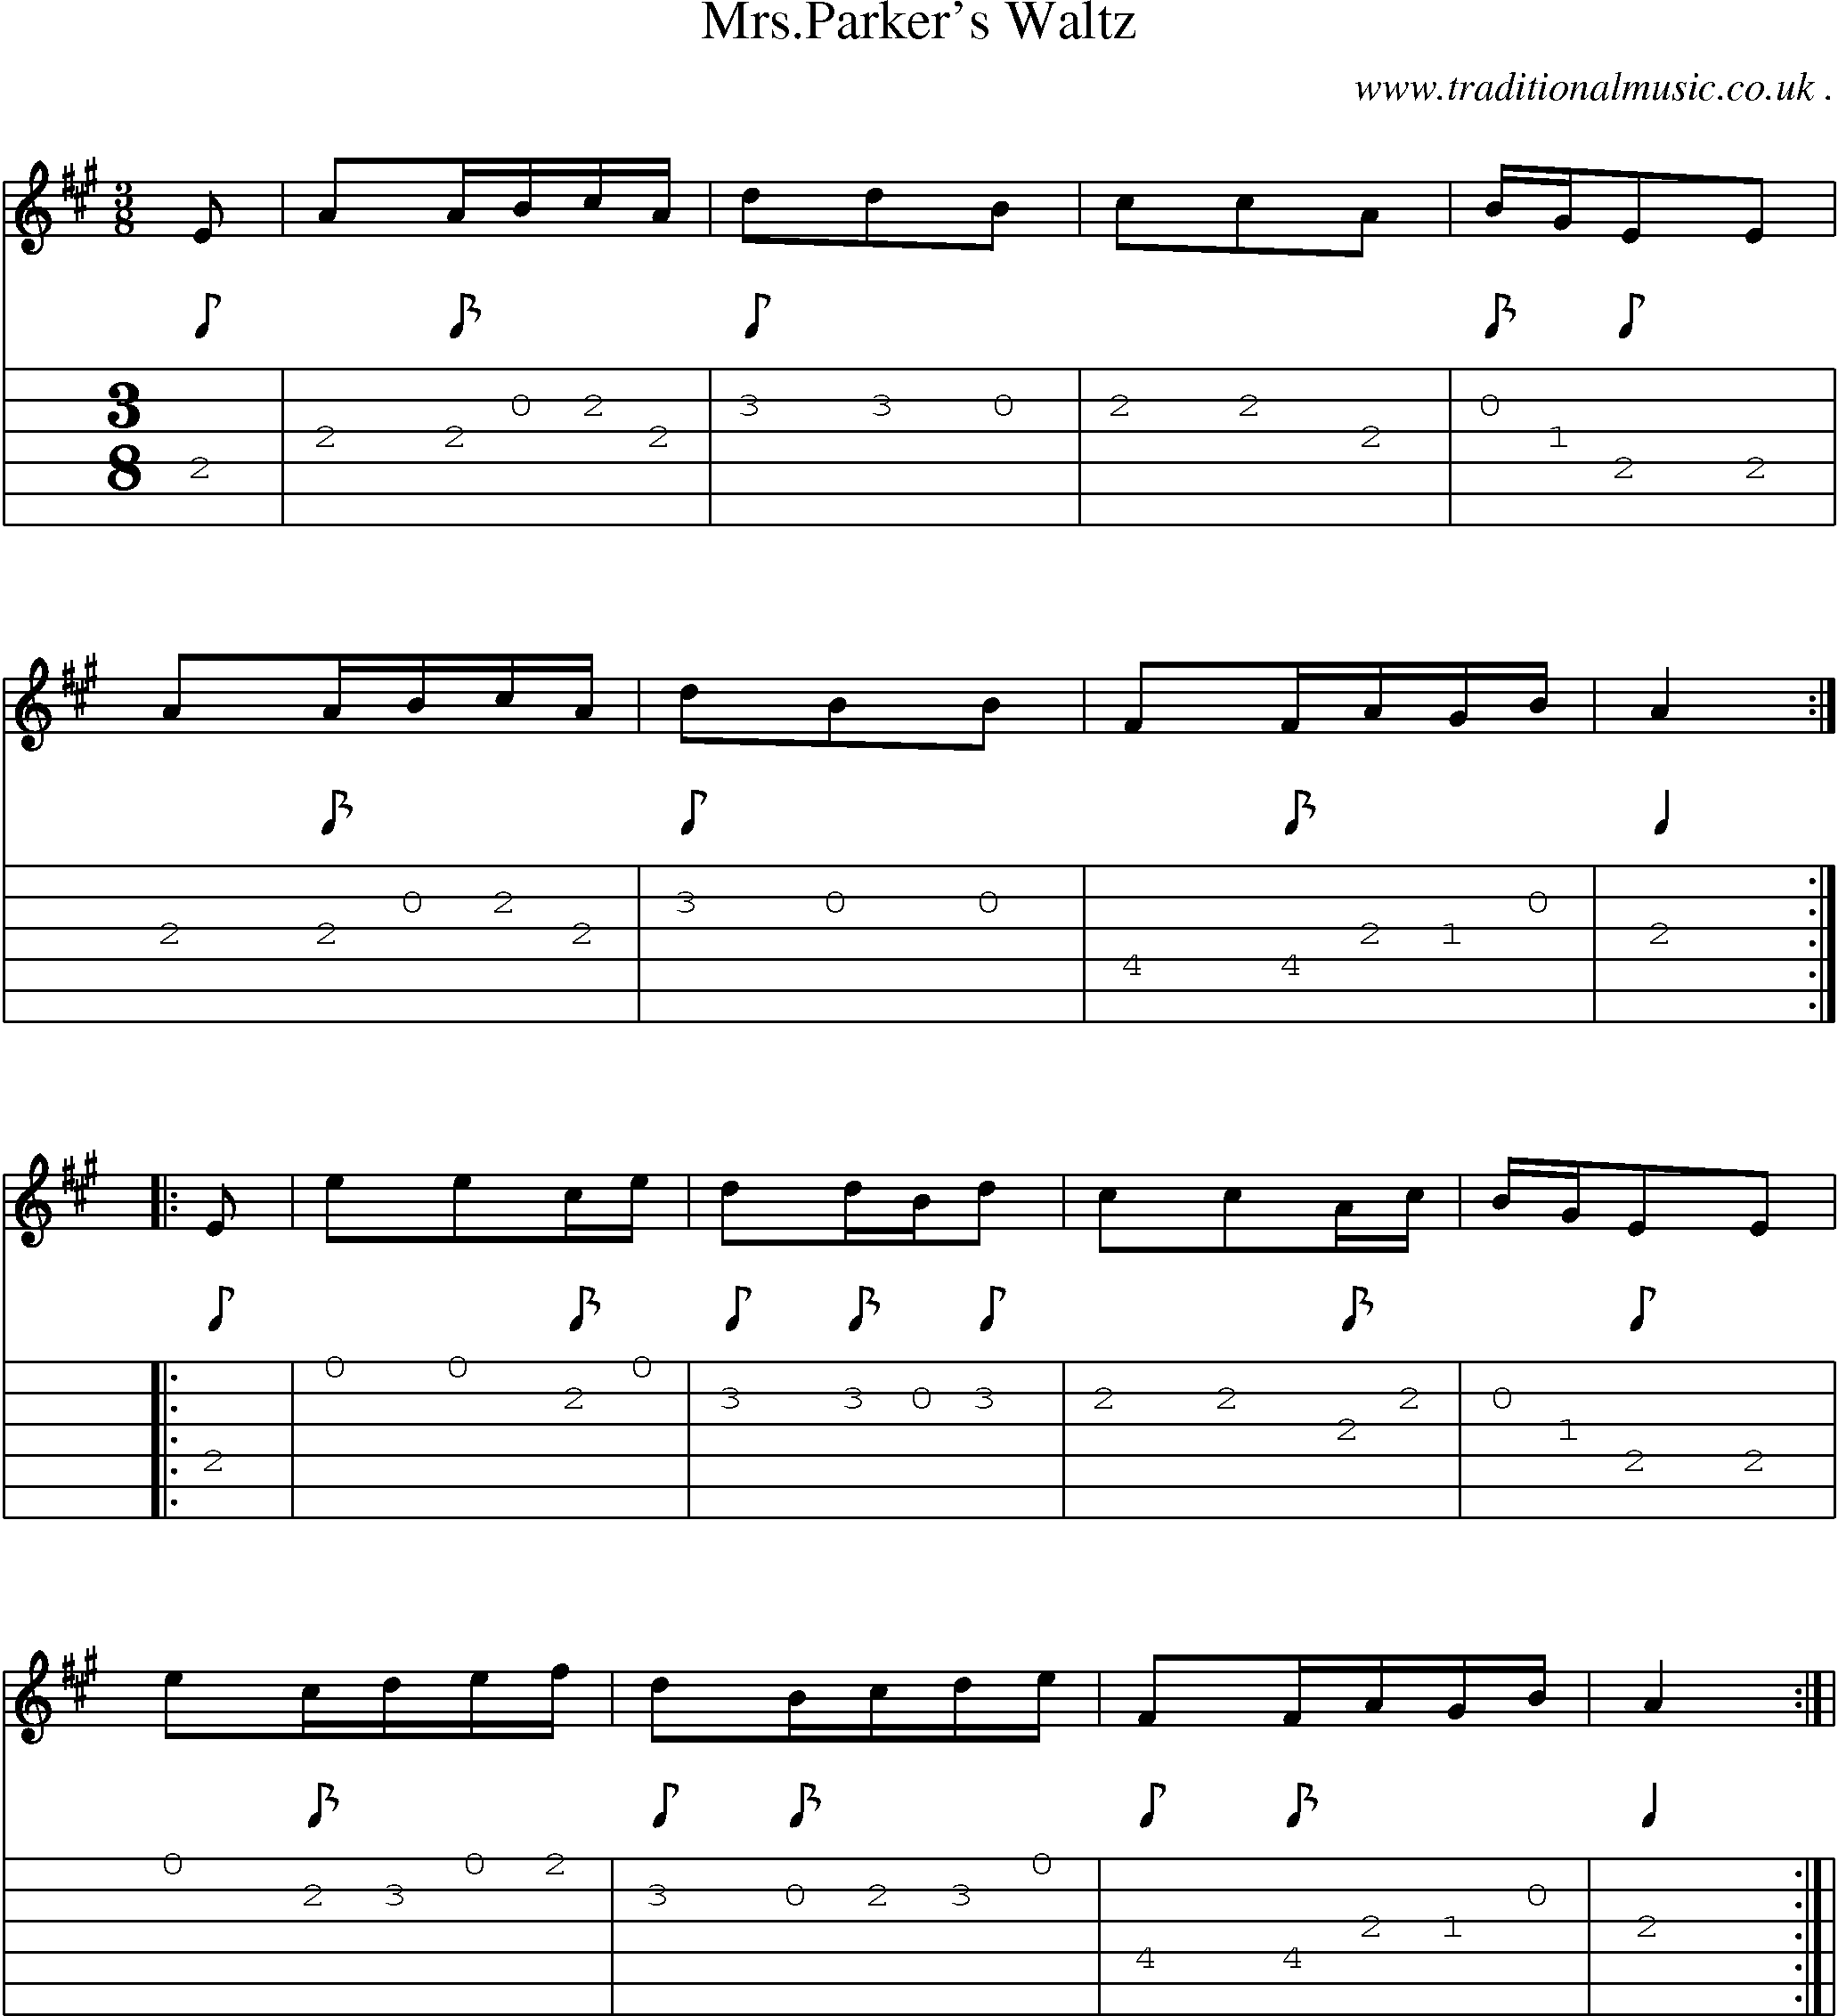 Sheet-Music and Guitar Tabs for Mrsparkers Waltz